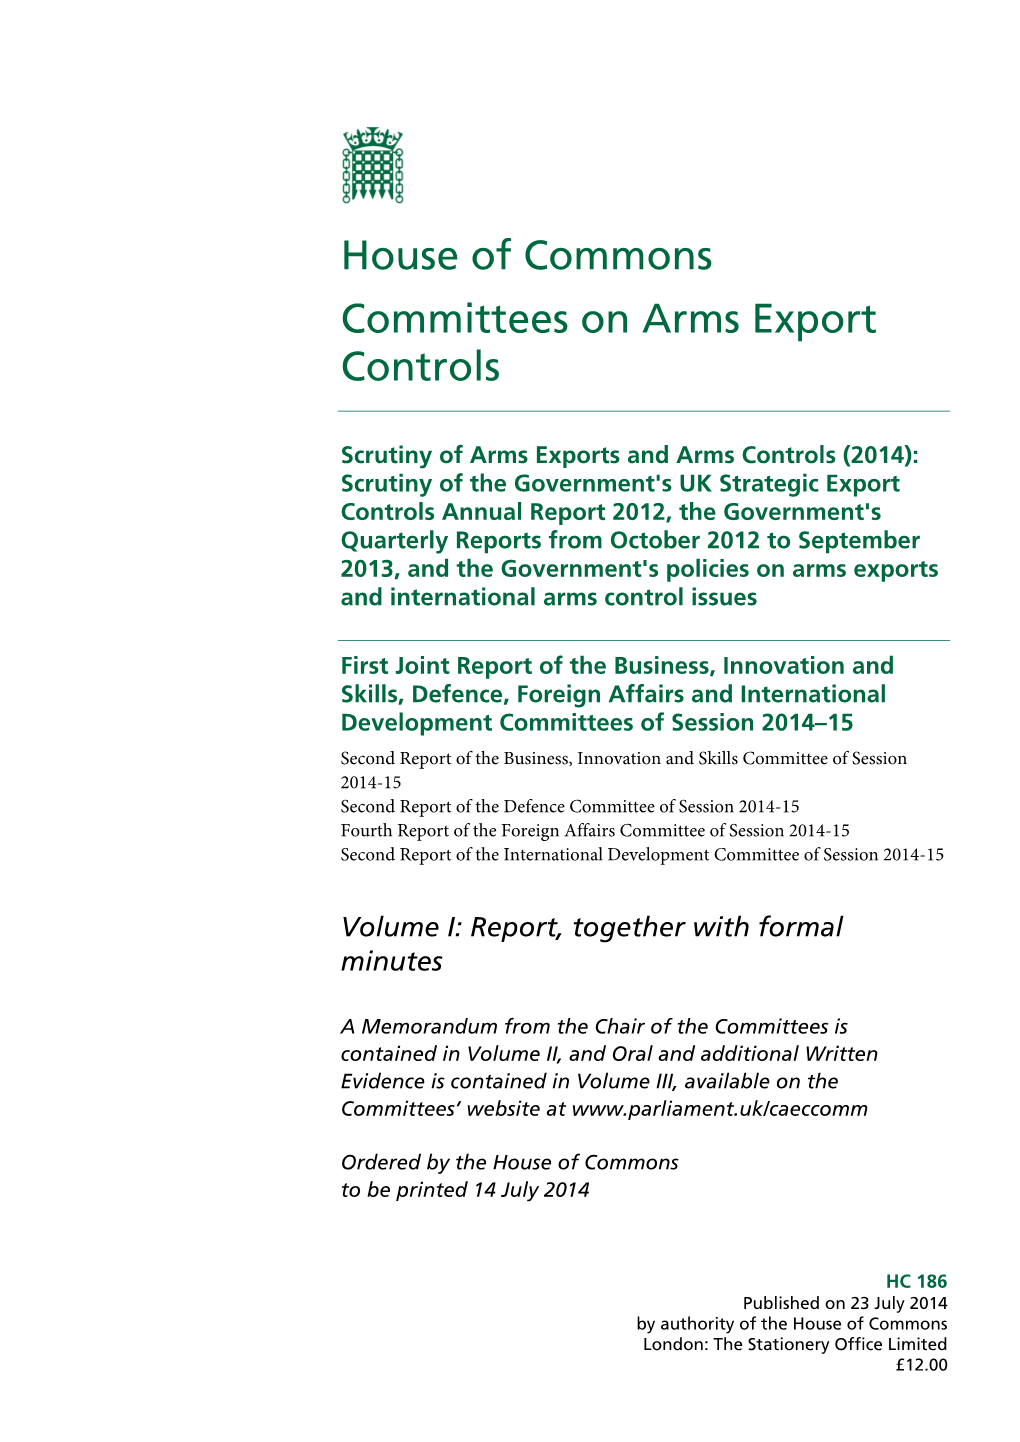 Scrutiny of Arms Export Controls